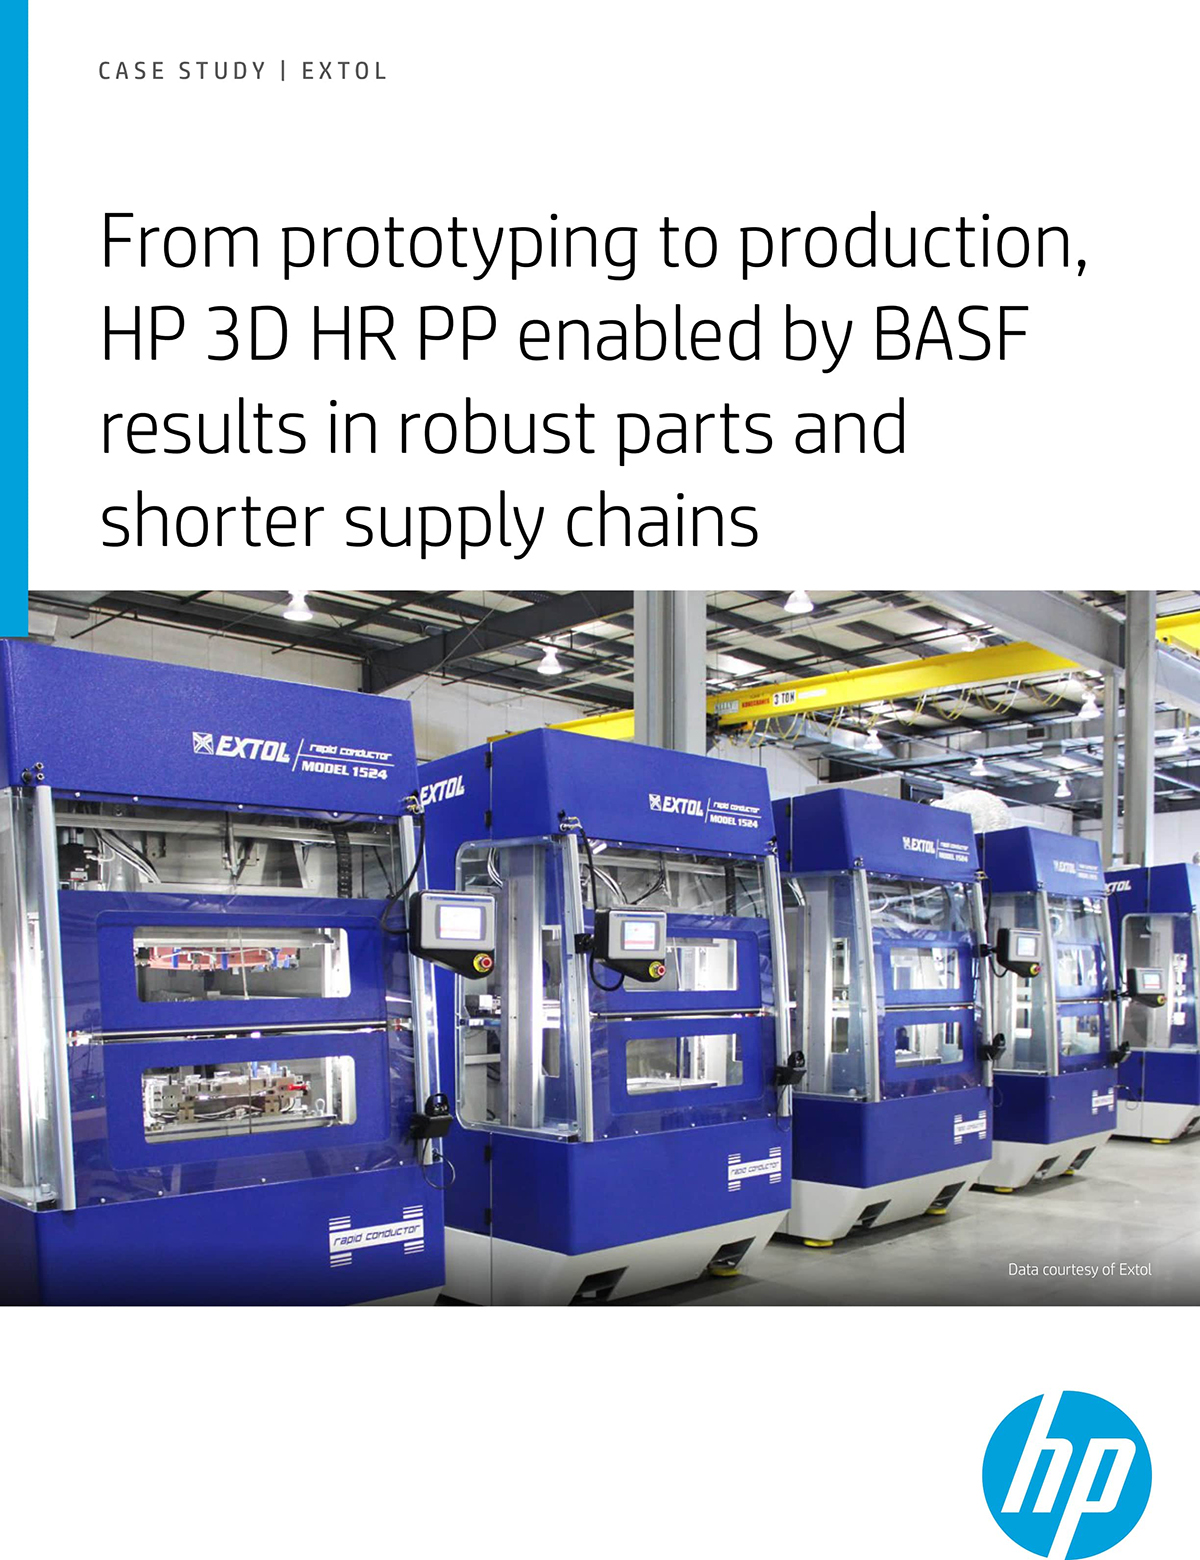 From prototyping to production, HP 3D HR PP enabled by BASF results in robust parts and shorter supply chains